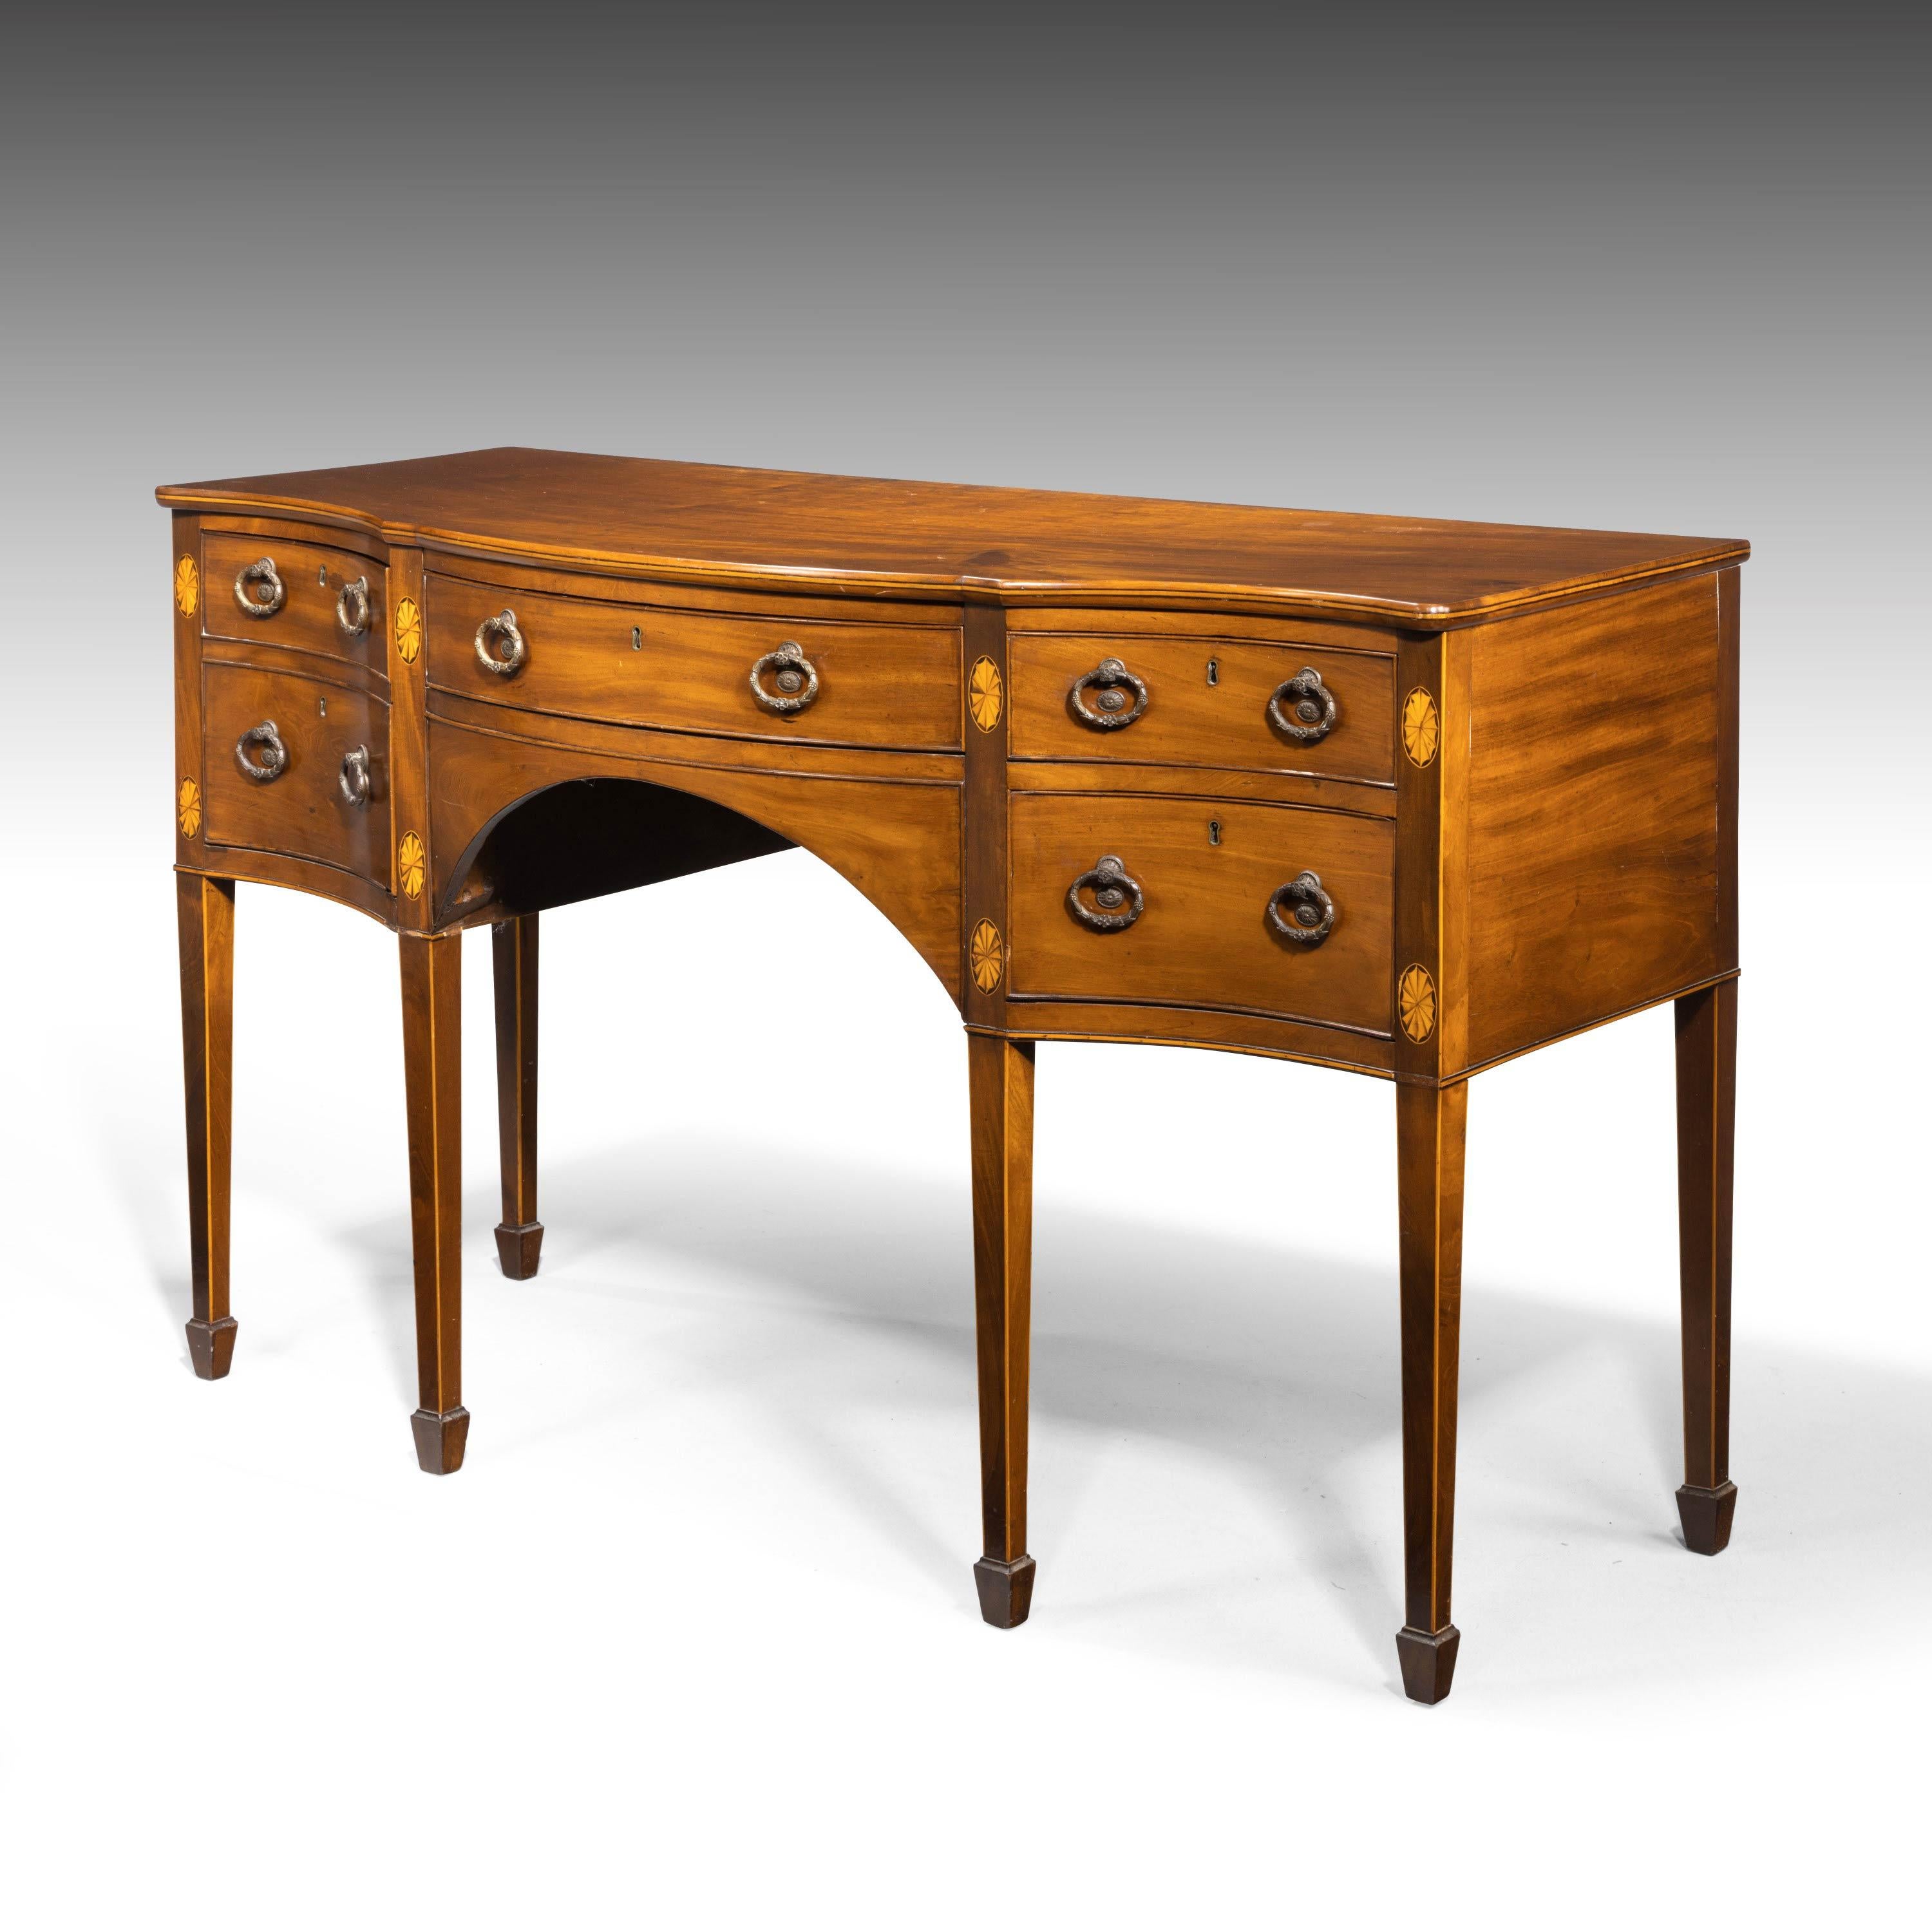 Very Fine George III Period Sideboard by Gillows of Lancaster 1